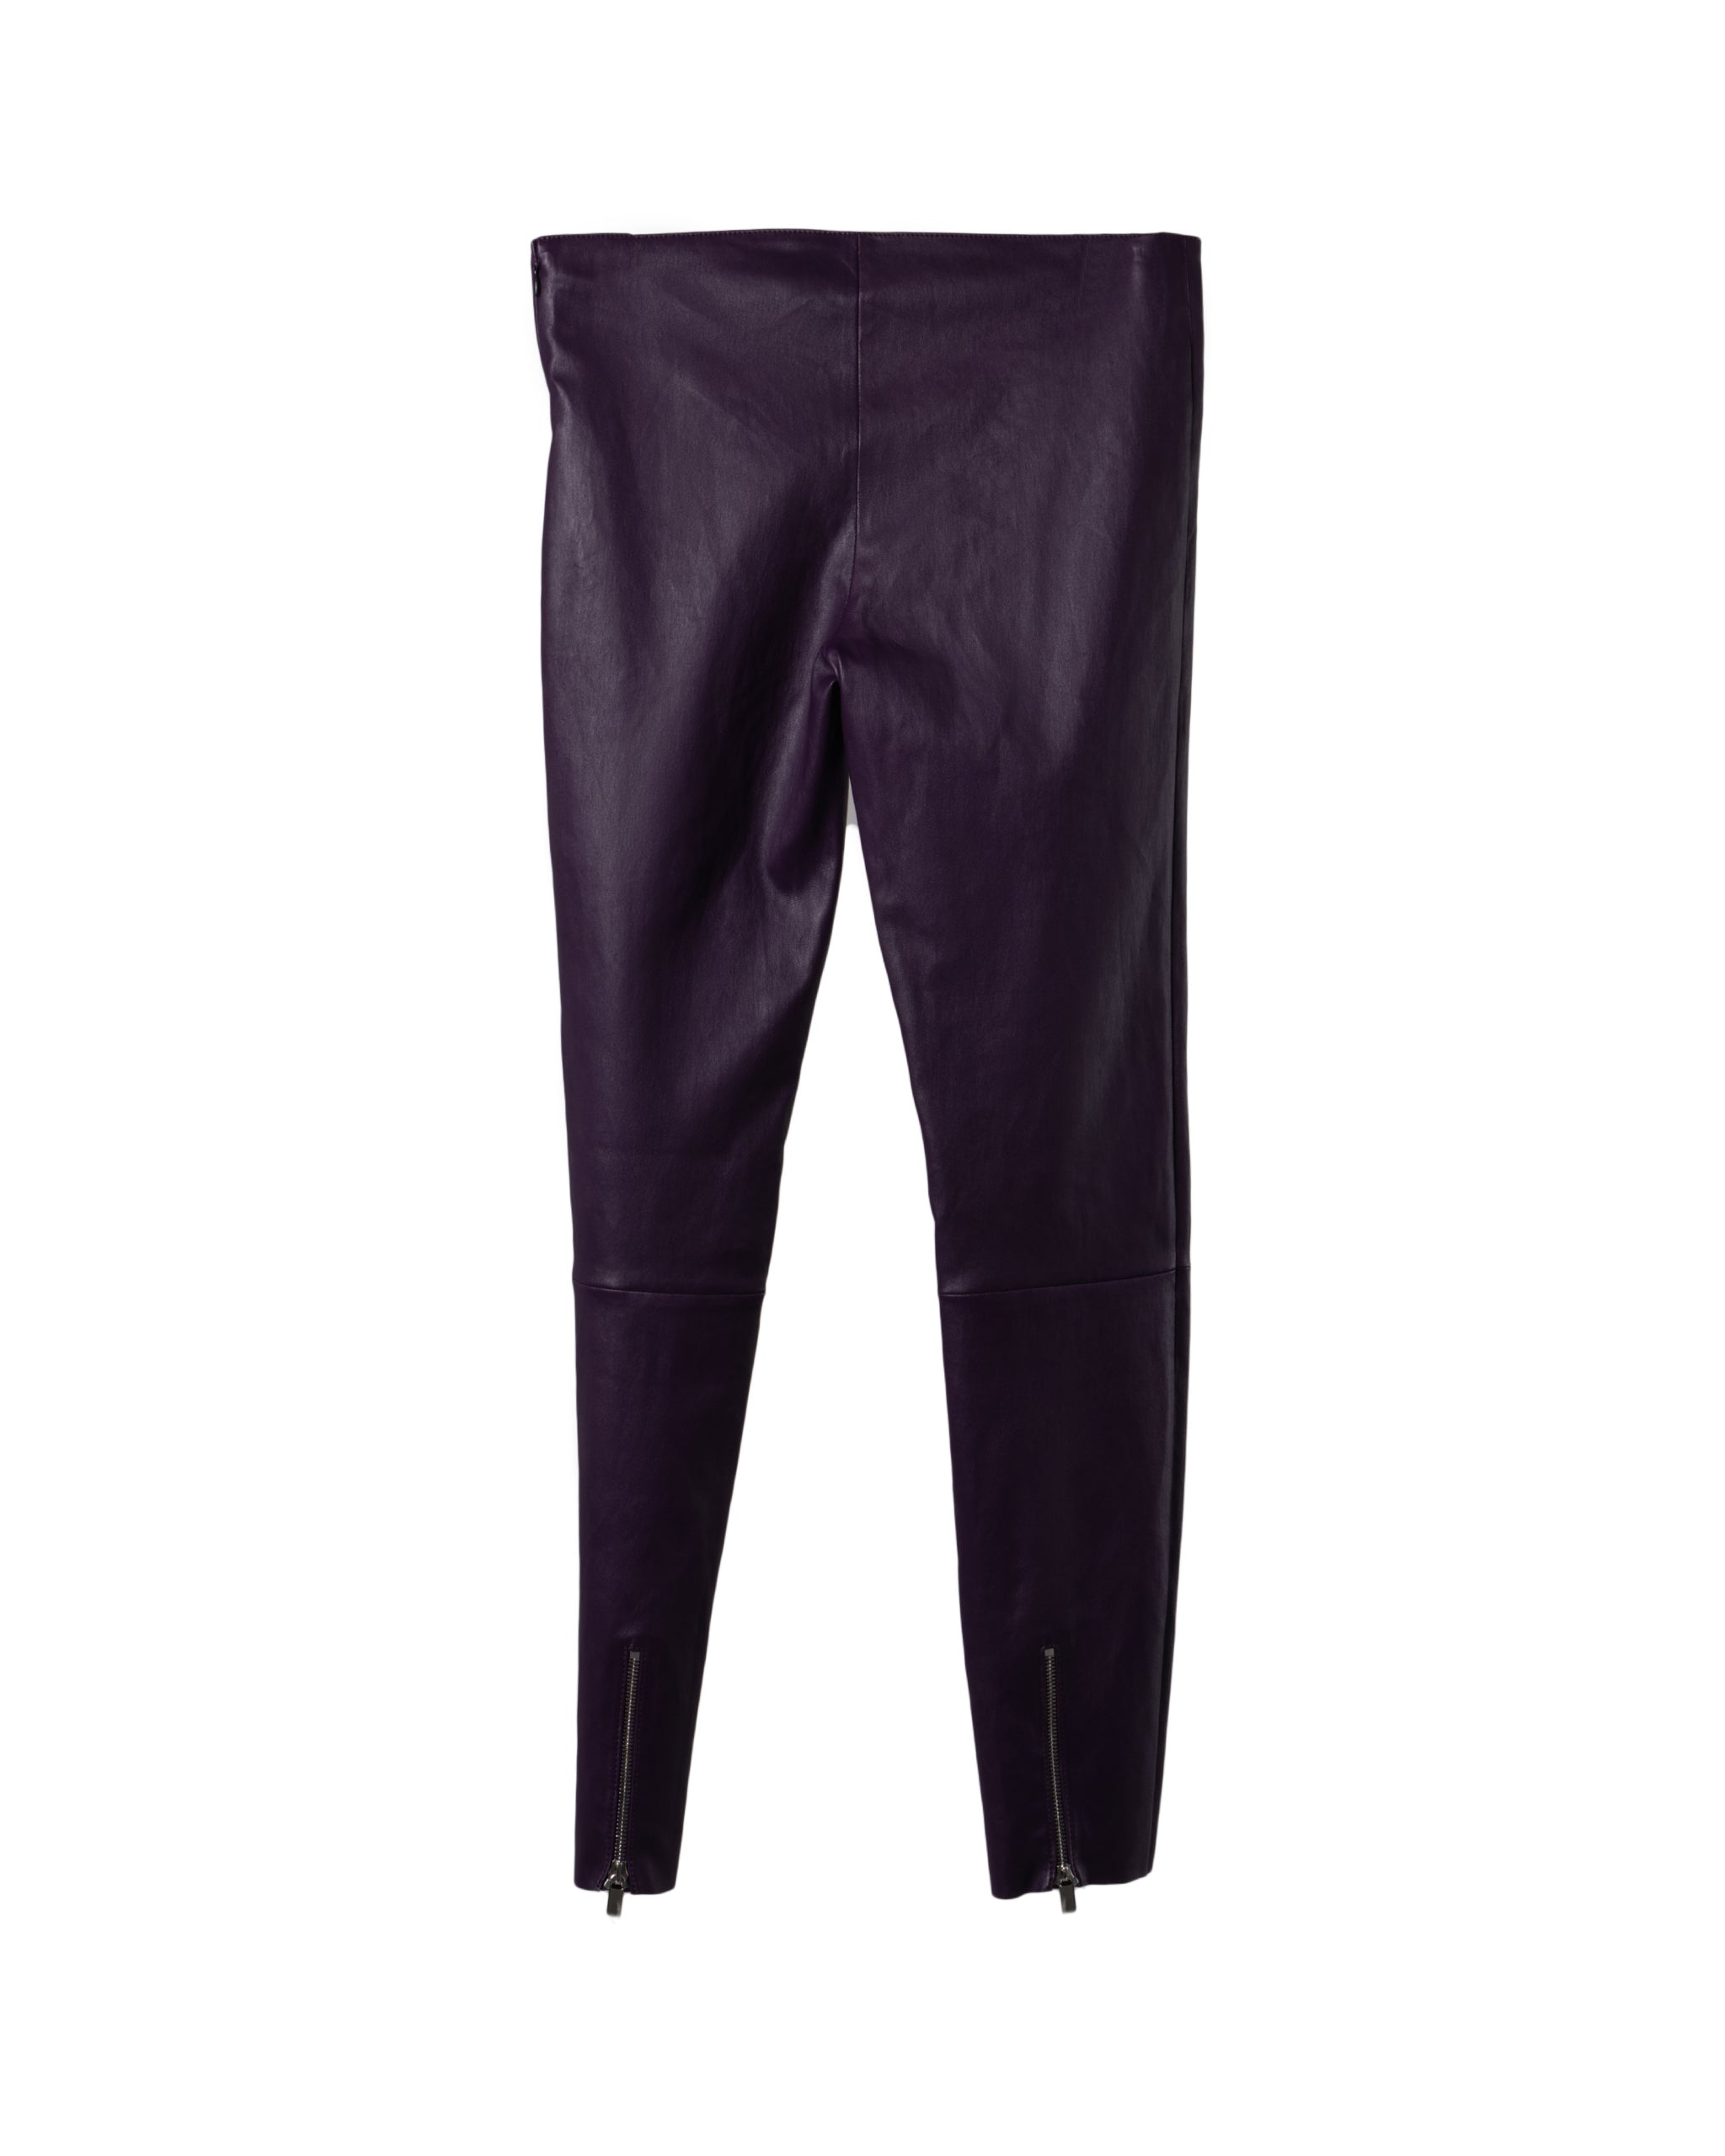 LOW RISE STRETCH LEATHER ZIP LEGGING